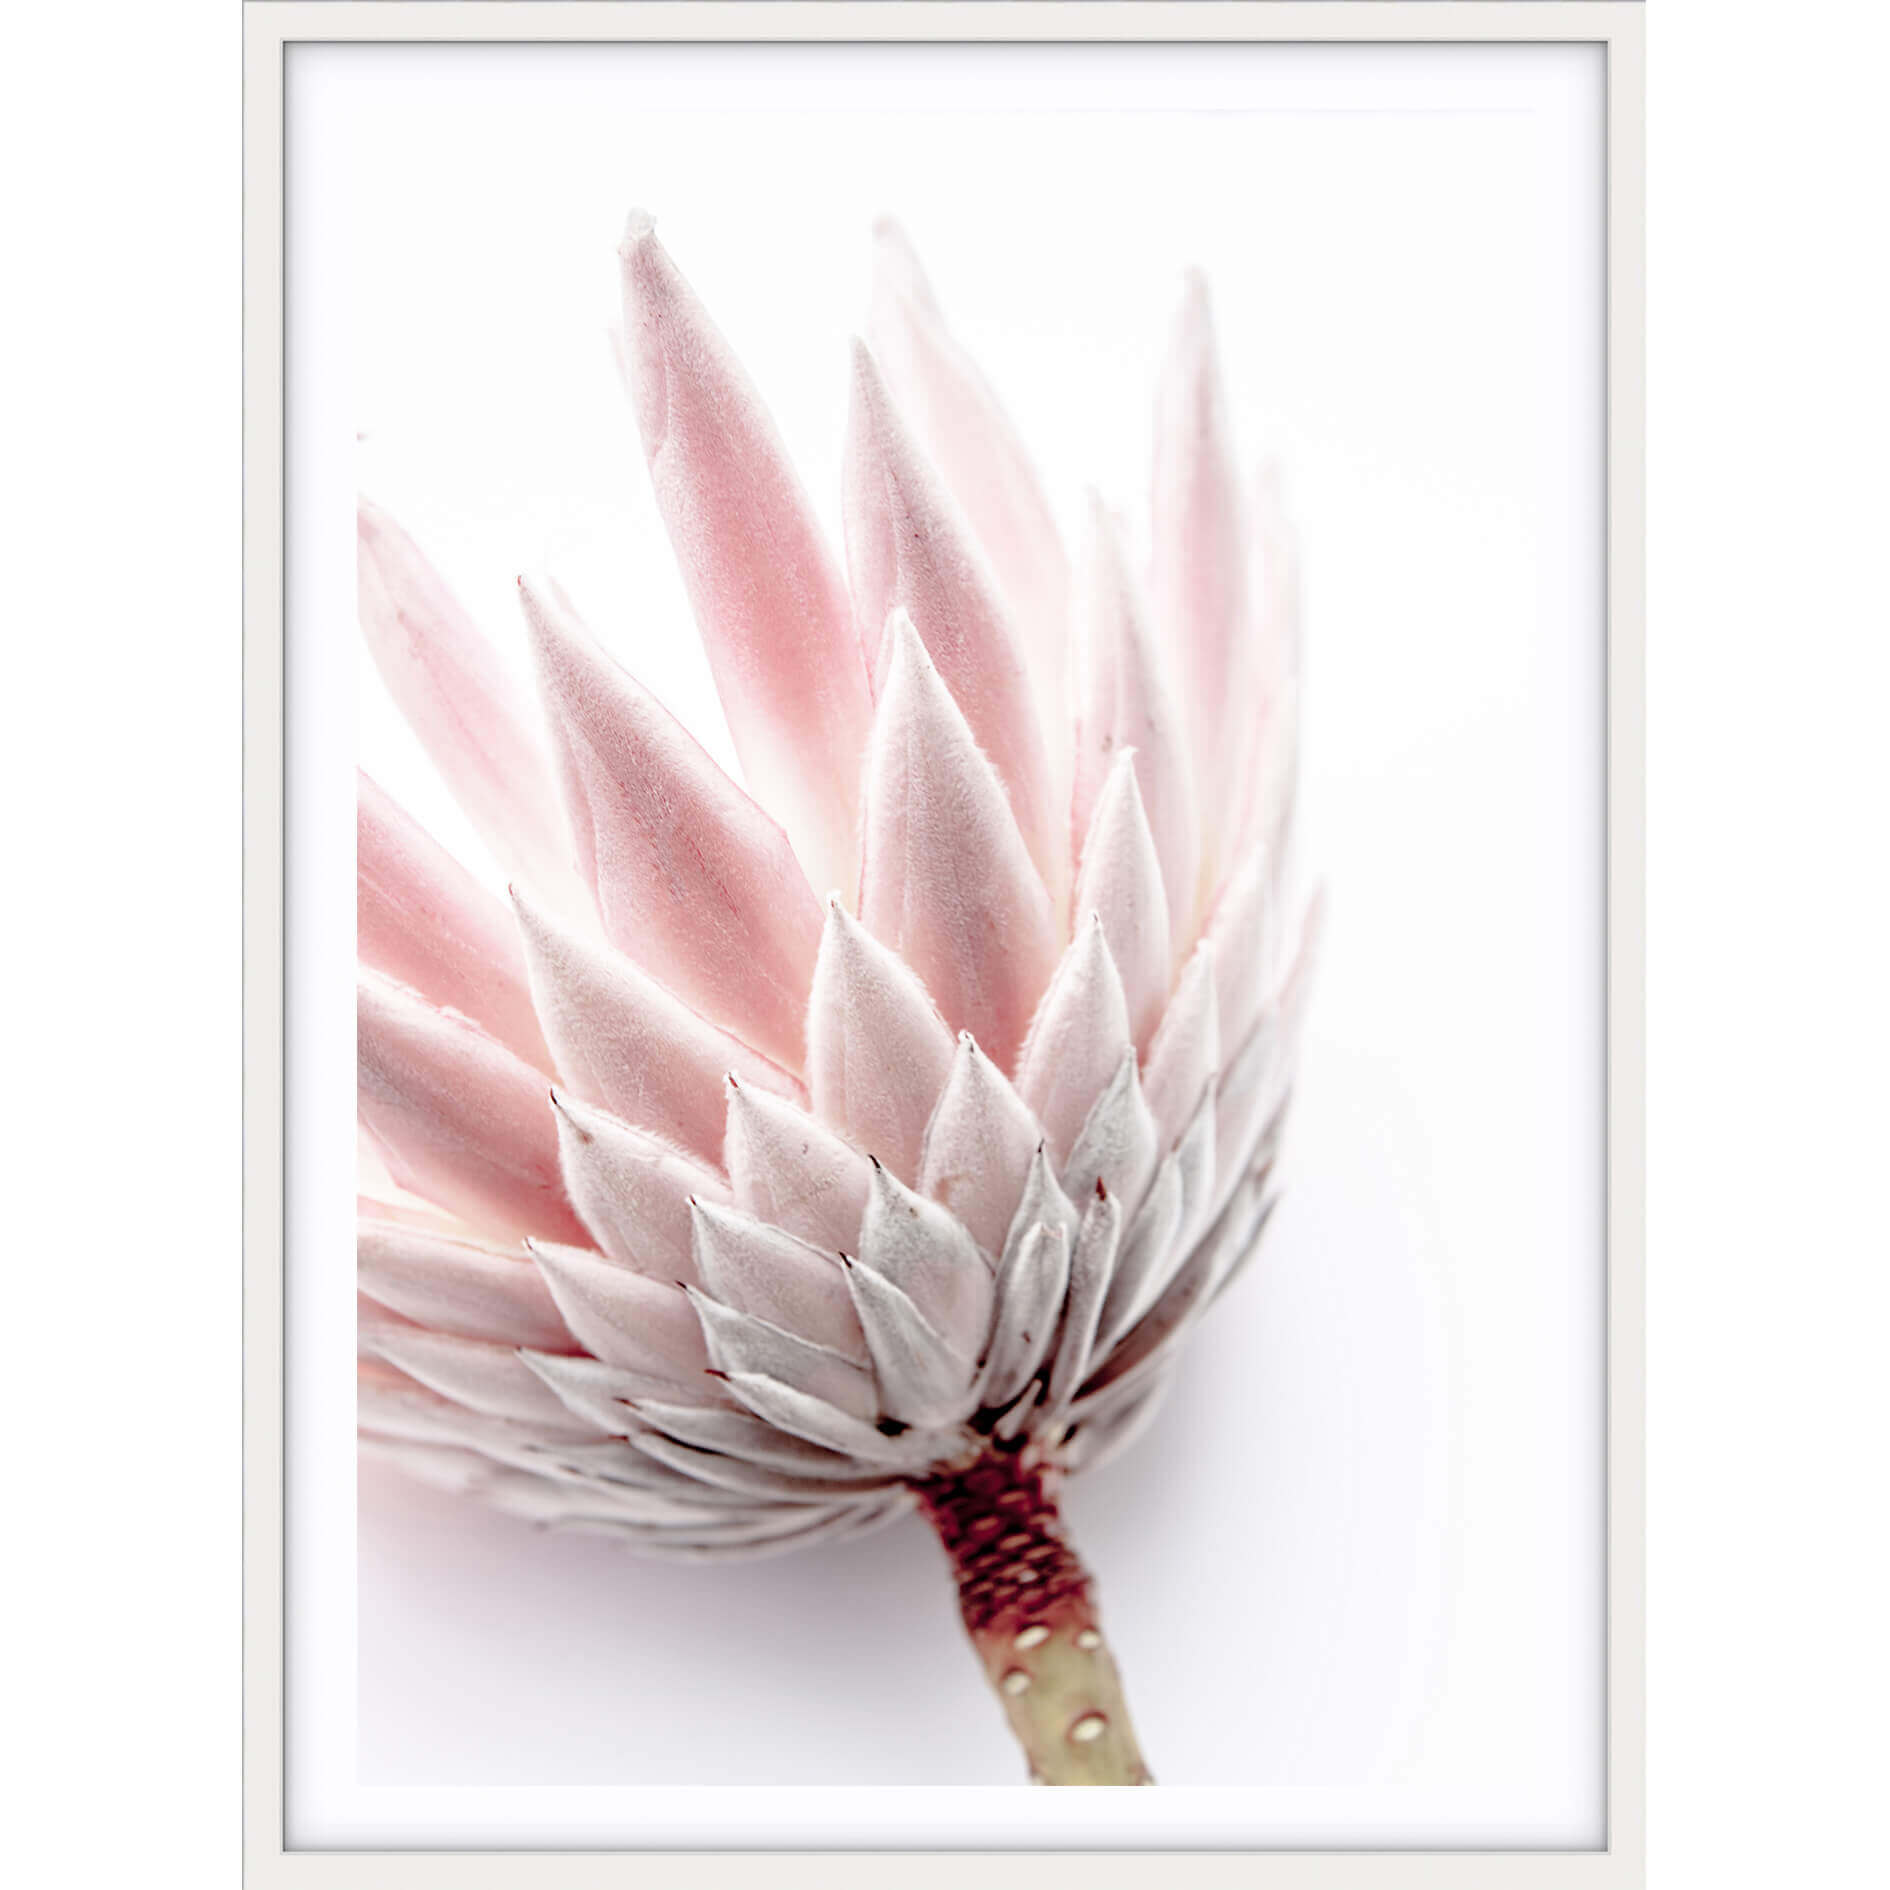 King Protea I Photographic Print styled -$35 - $119 |The Home Maven